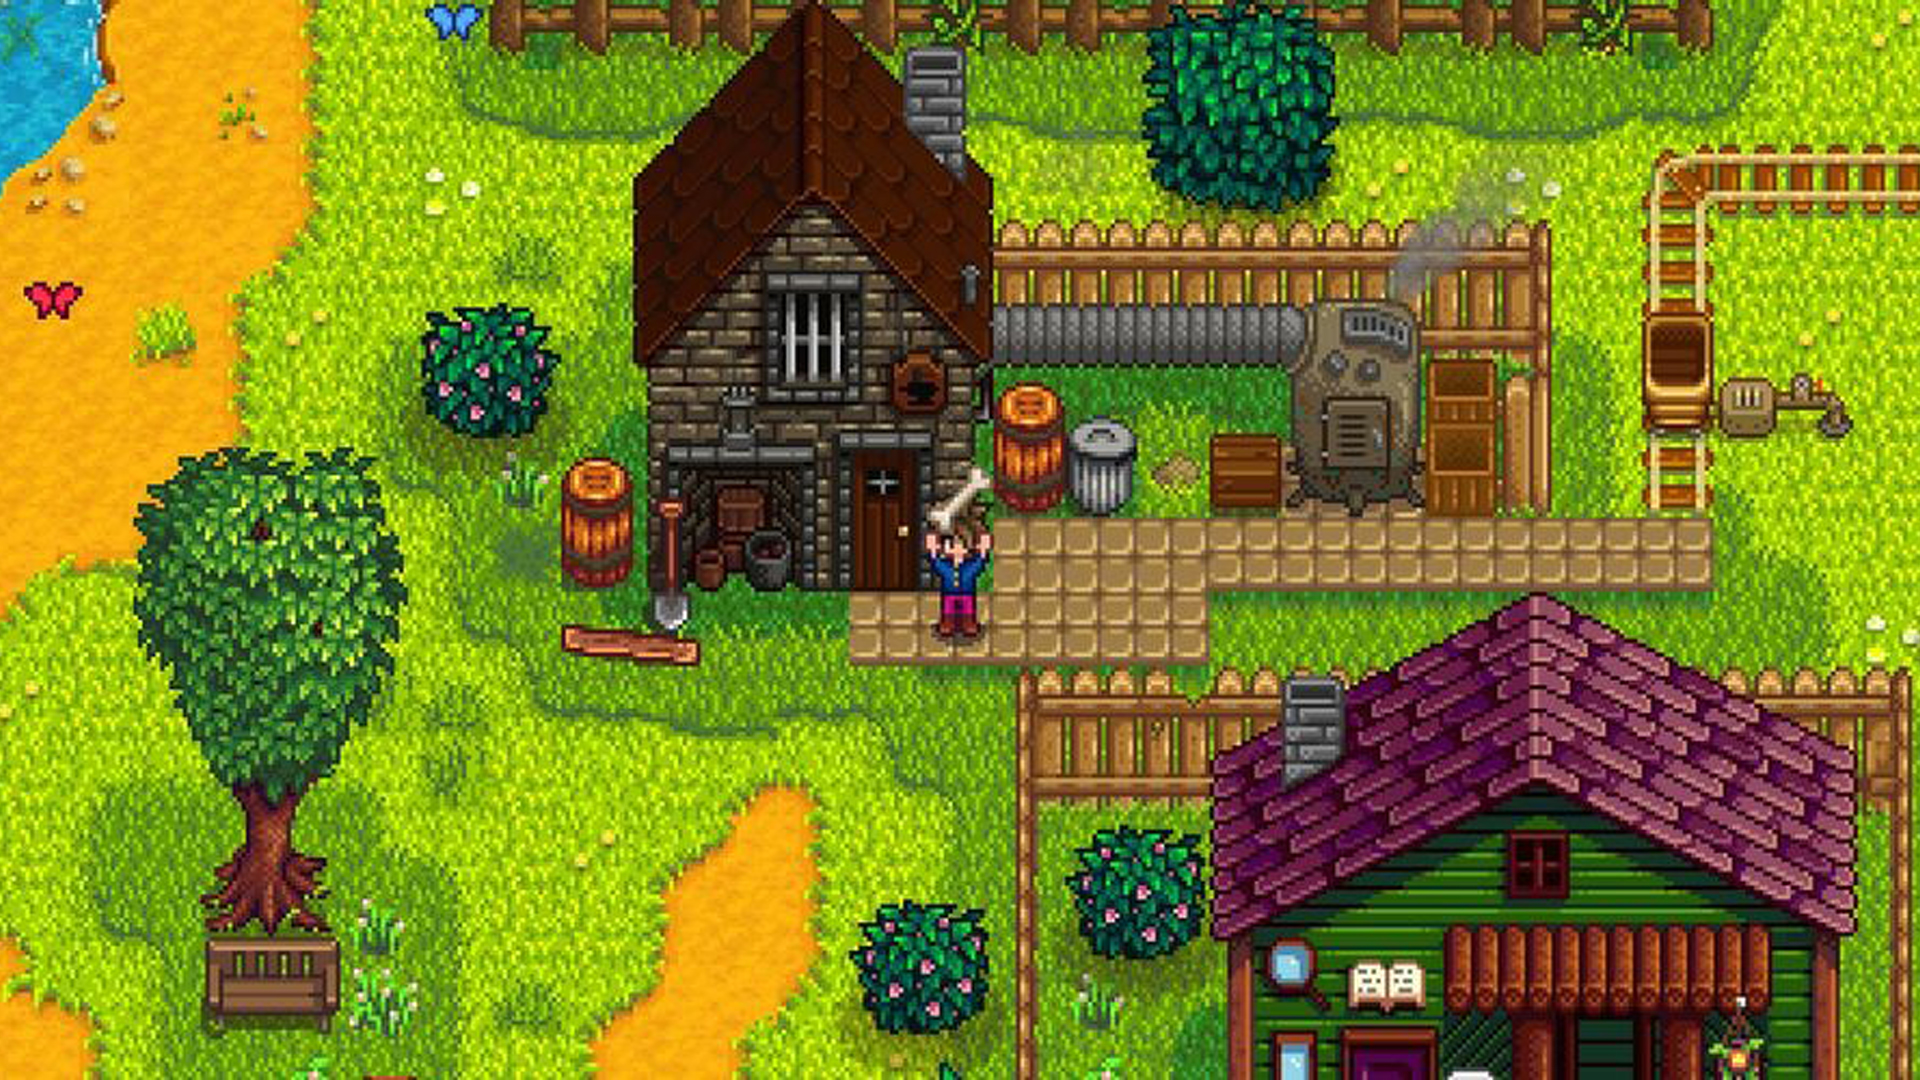 Stardew Valley may get more updates: “there’s always room for improvement”